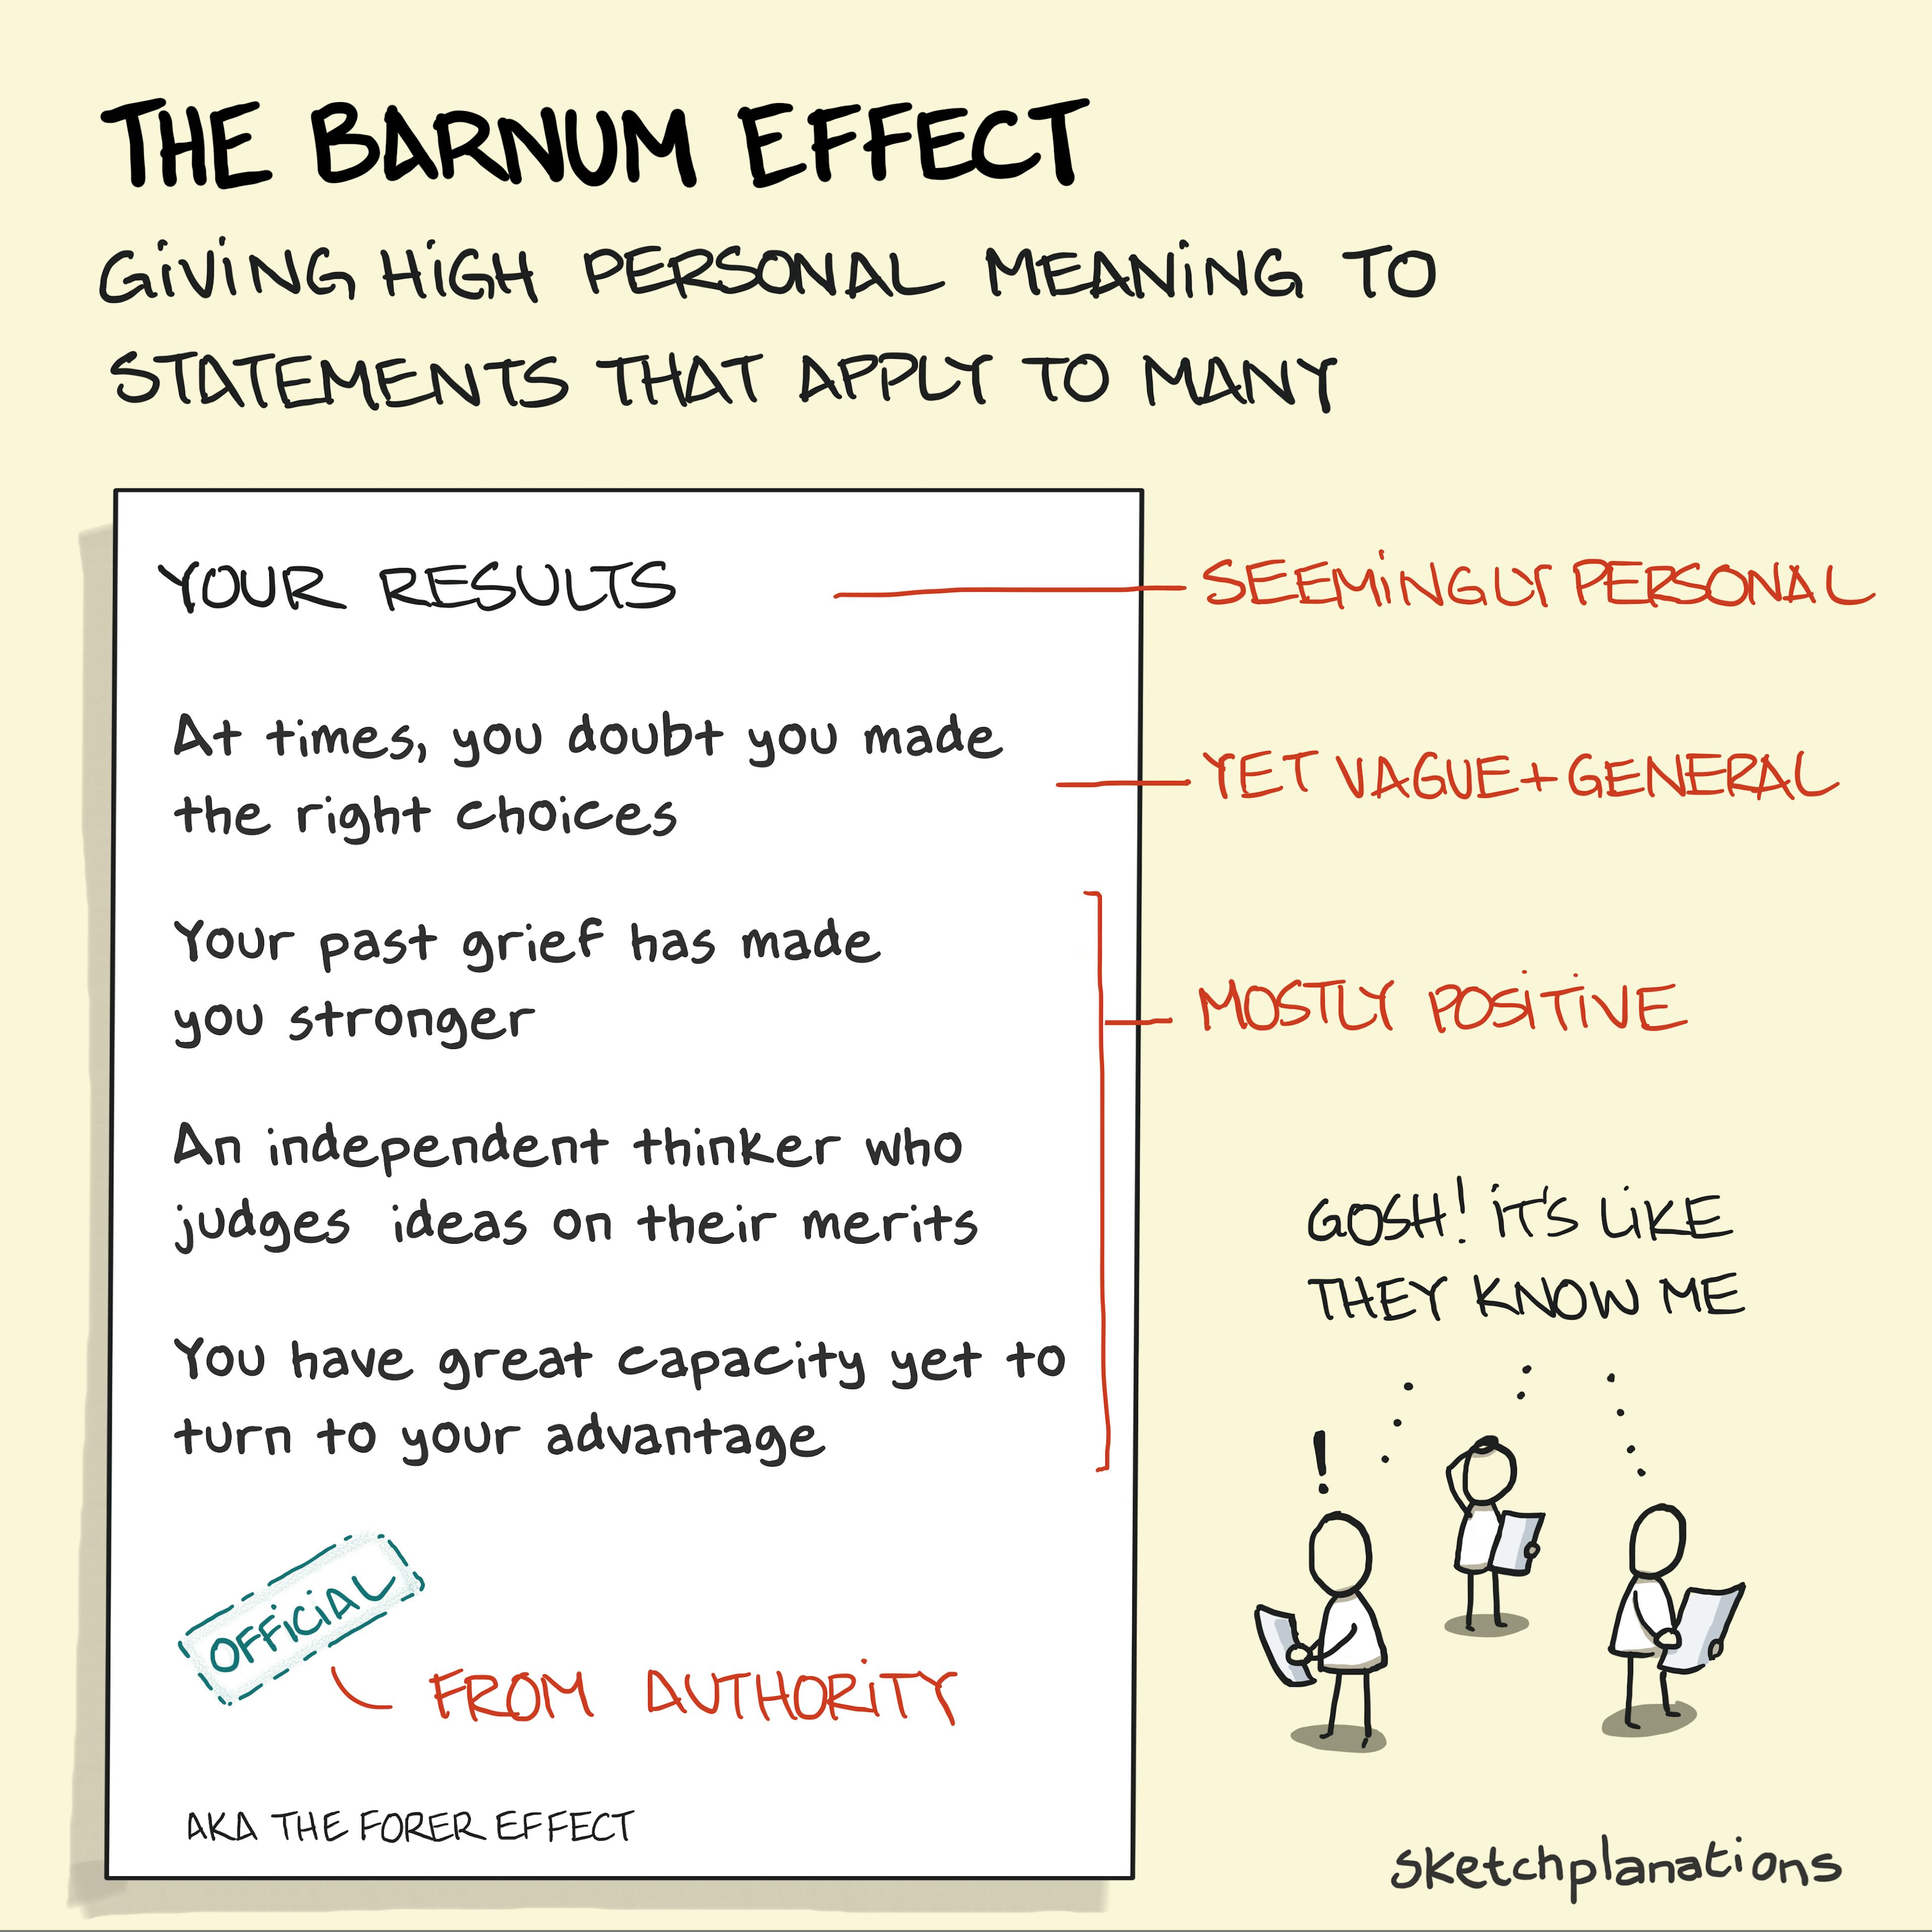 The Barnum effect - Sketchplanations